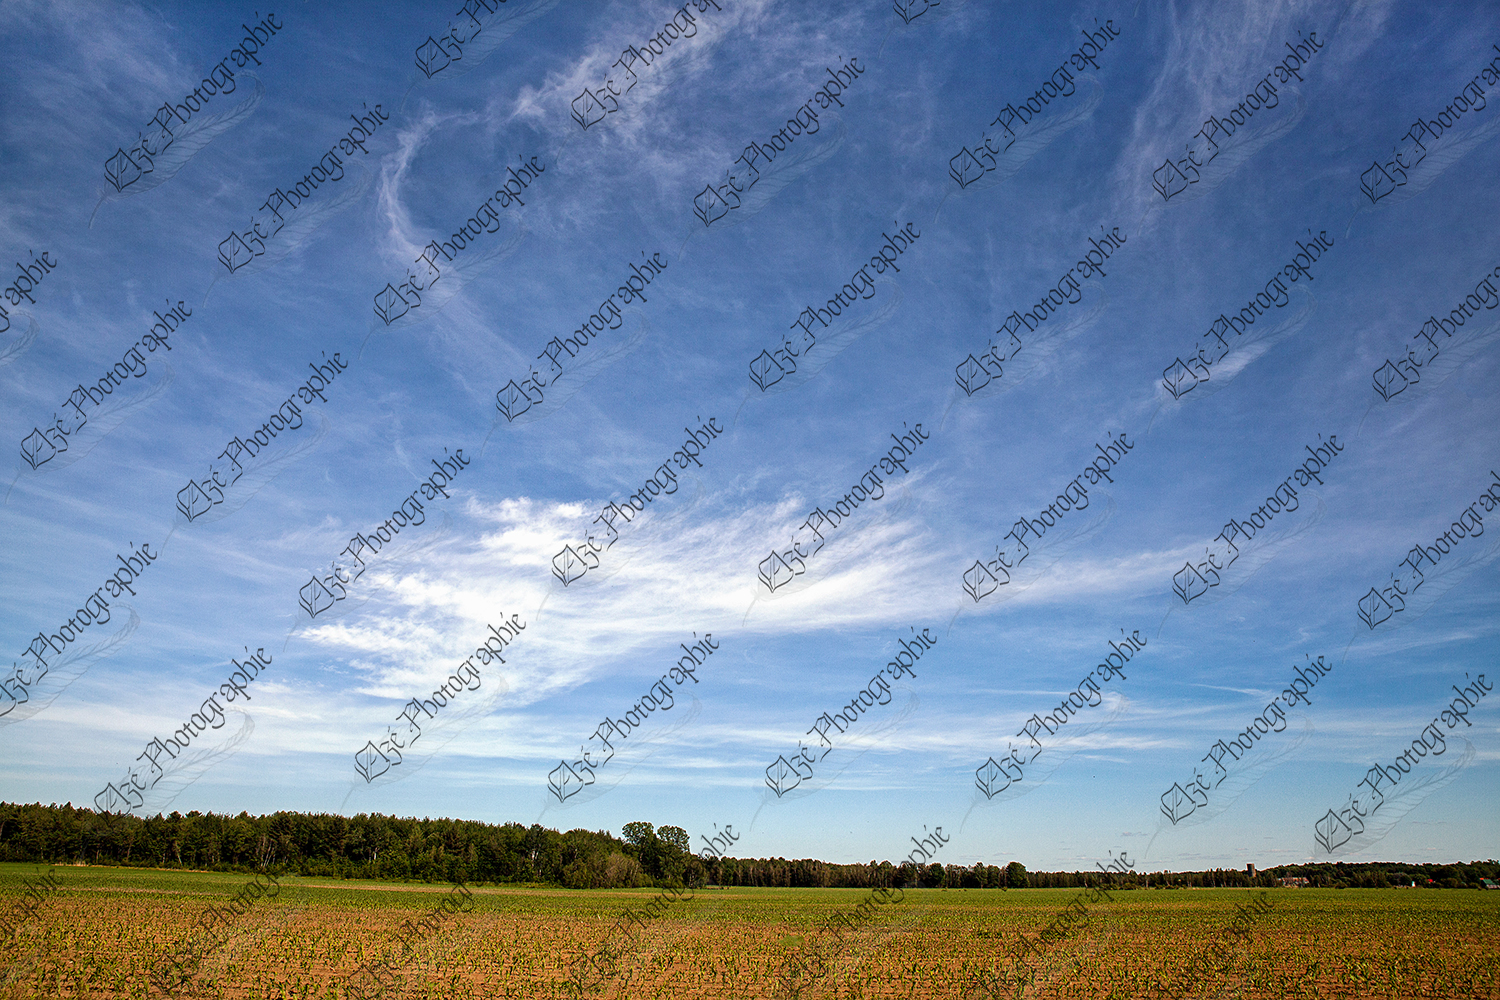 elze_photo_9254_champ_cultive_mais_conventionnel_field_countryside